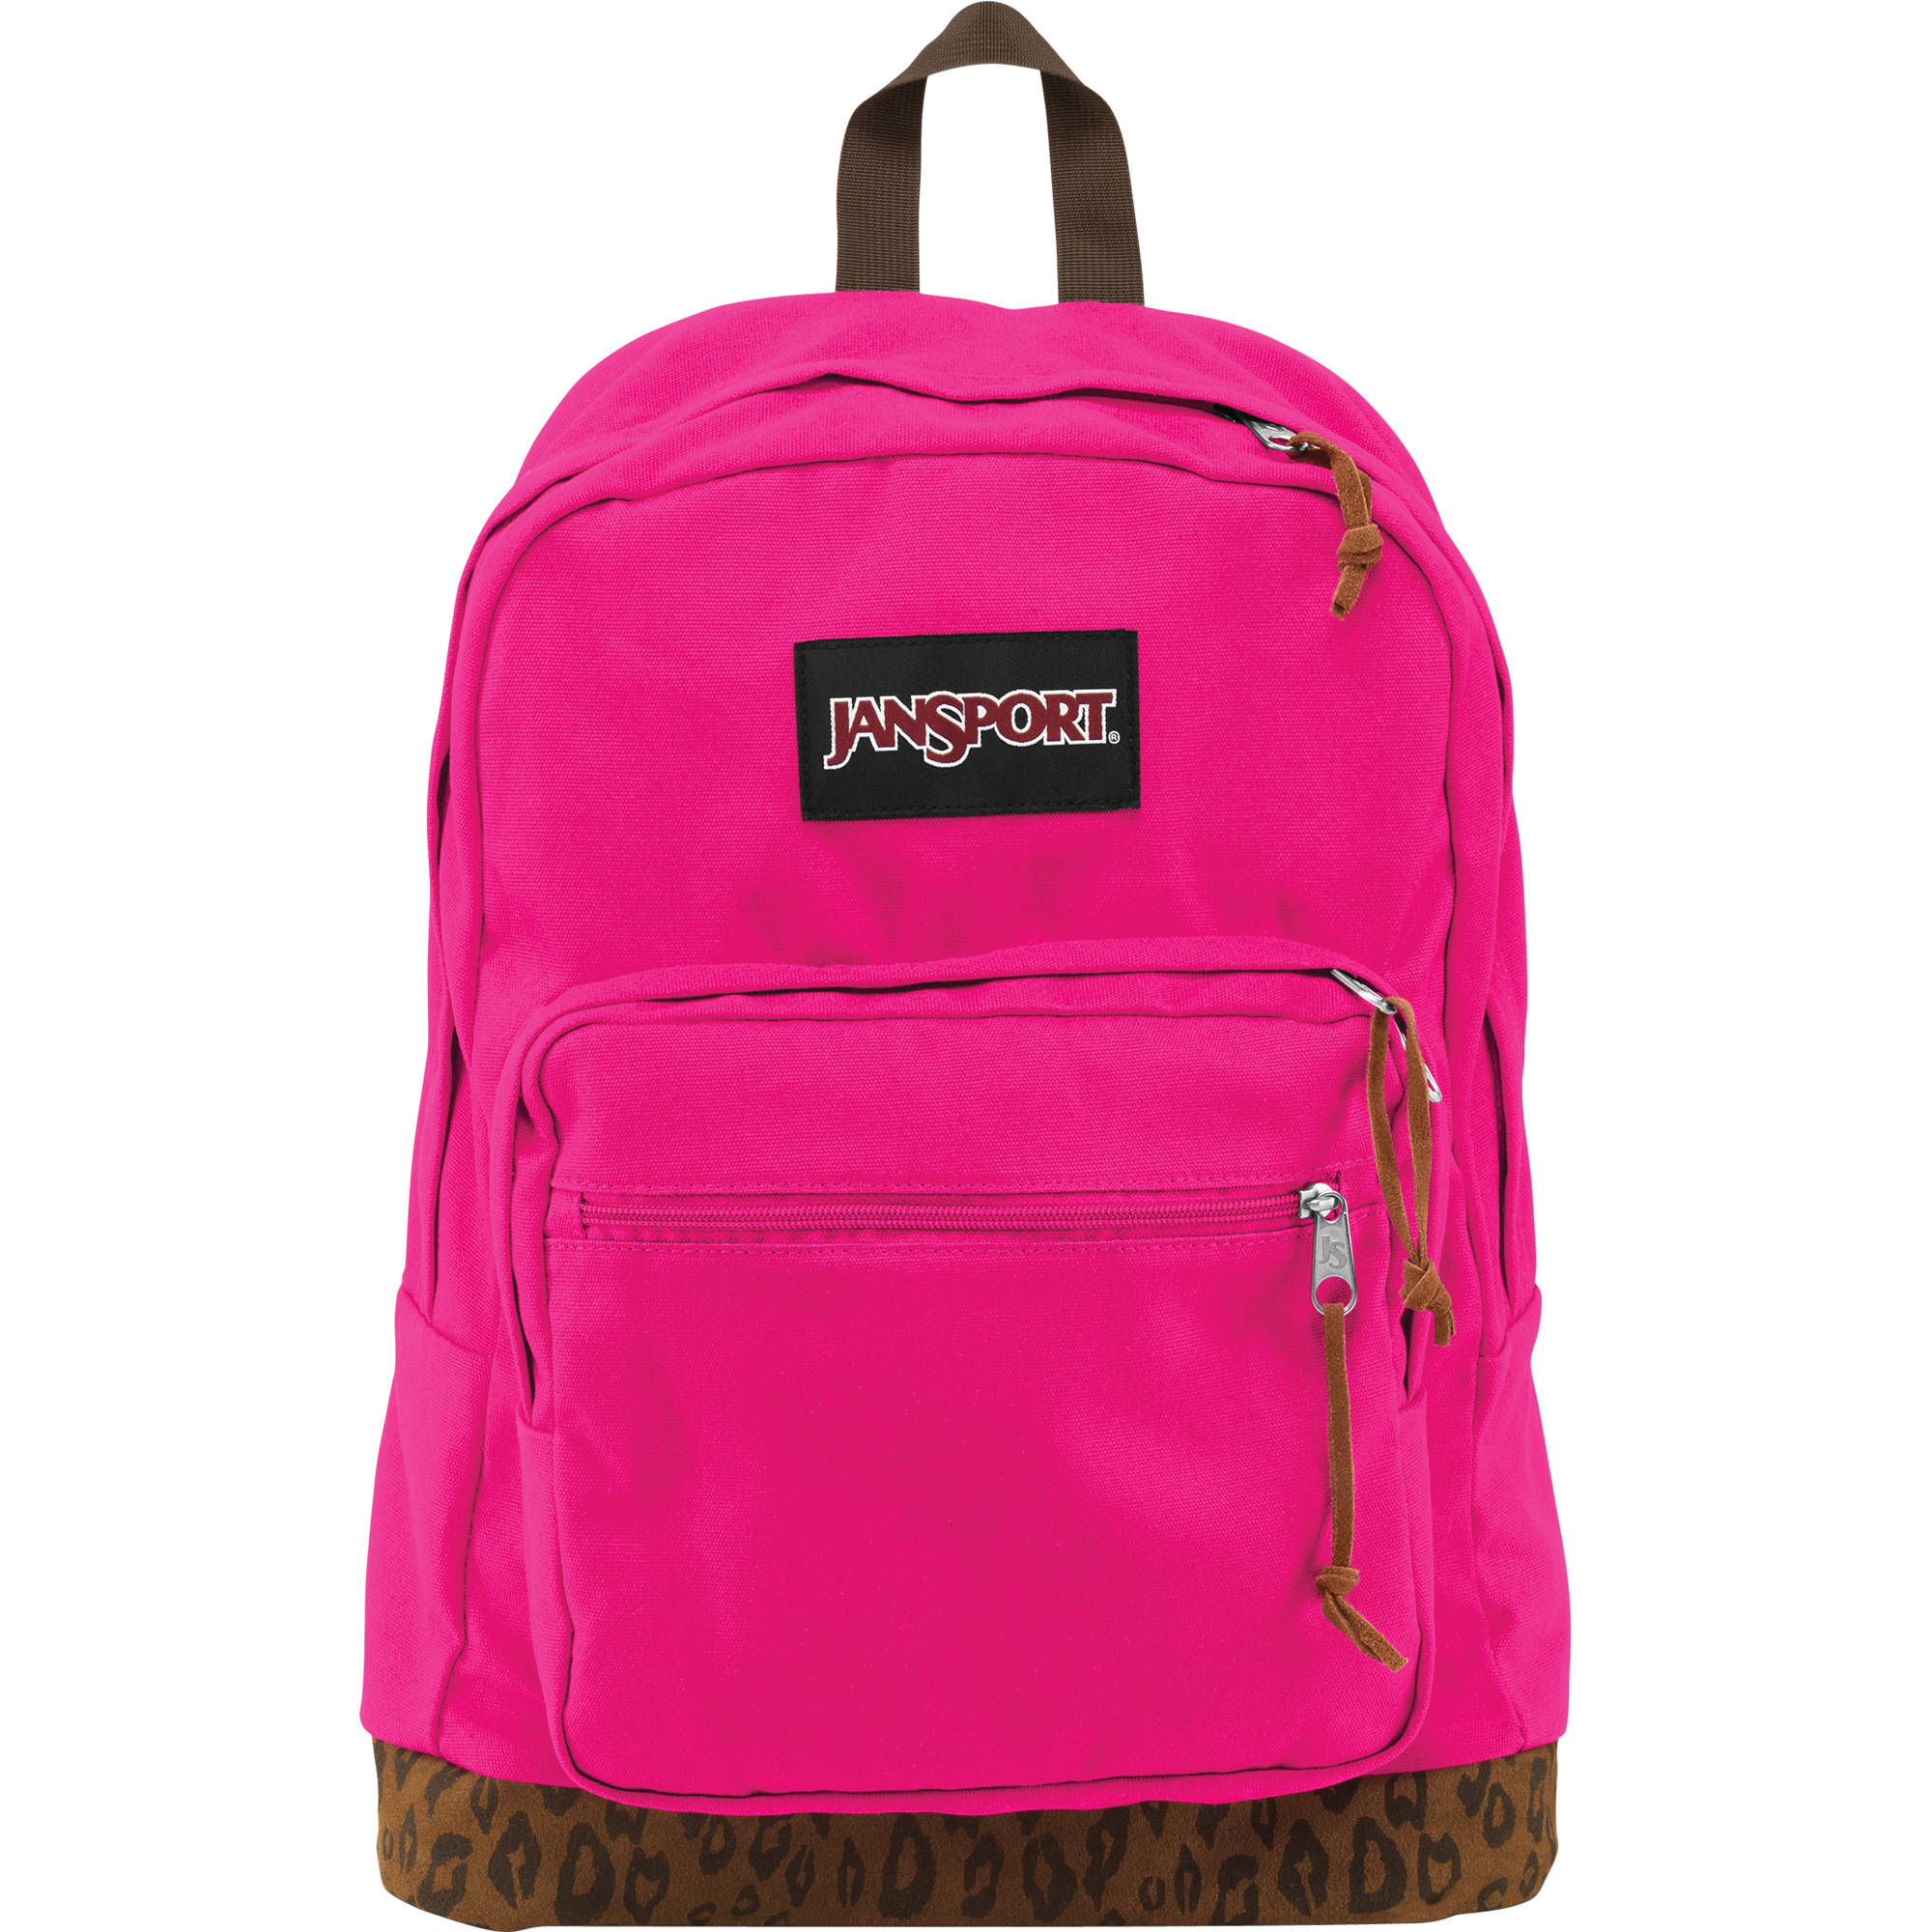 jansport right pack pink